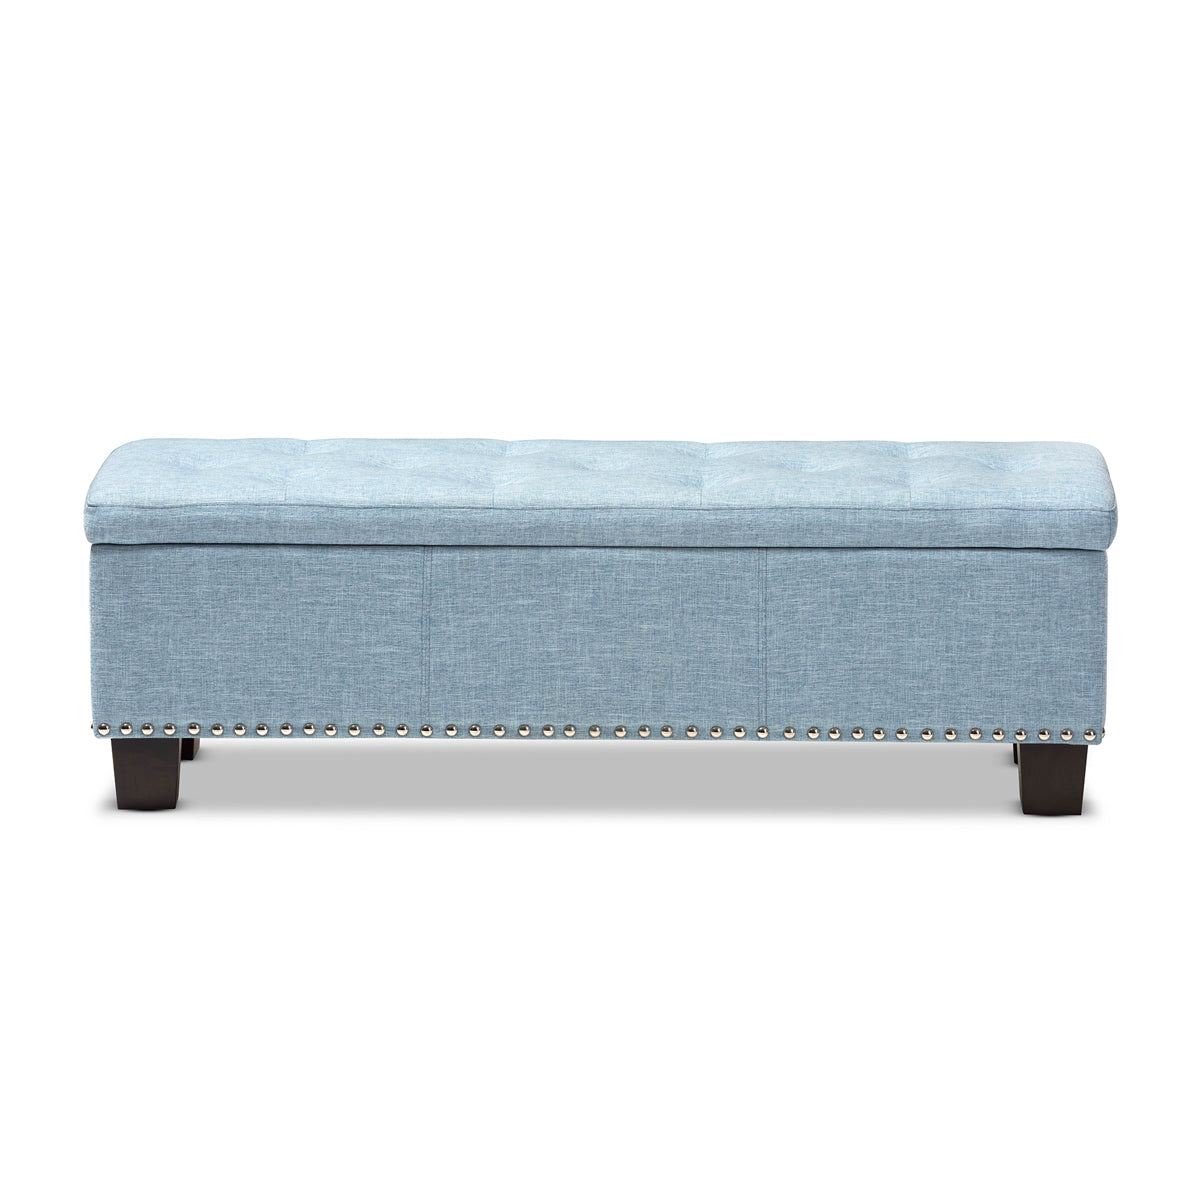 Baxton Studio Hannah Modern and Contemporary Light Blue Fabric Upholstered Button-Tufting Storage Ottoman Bench Baxton Studio-benches-Minimal And Modern - 4